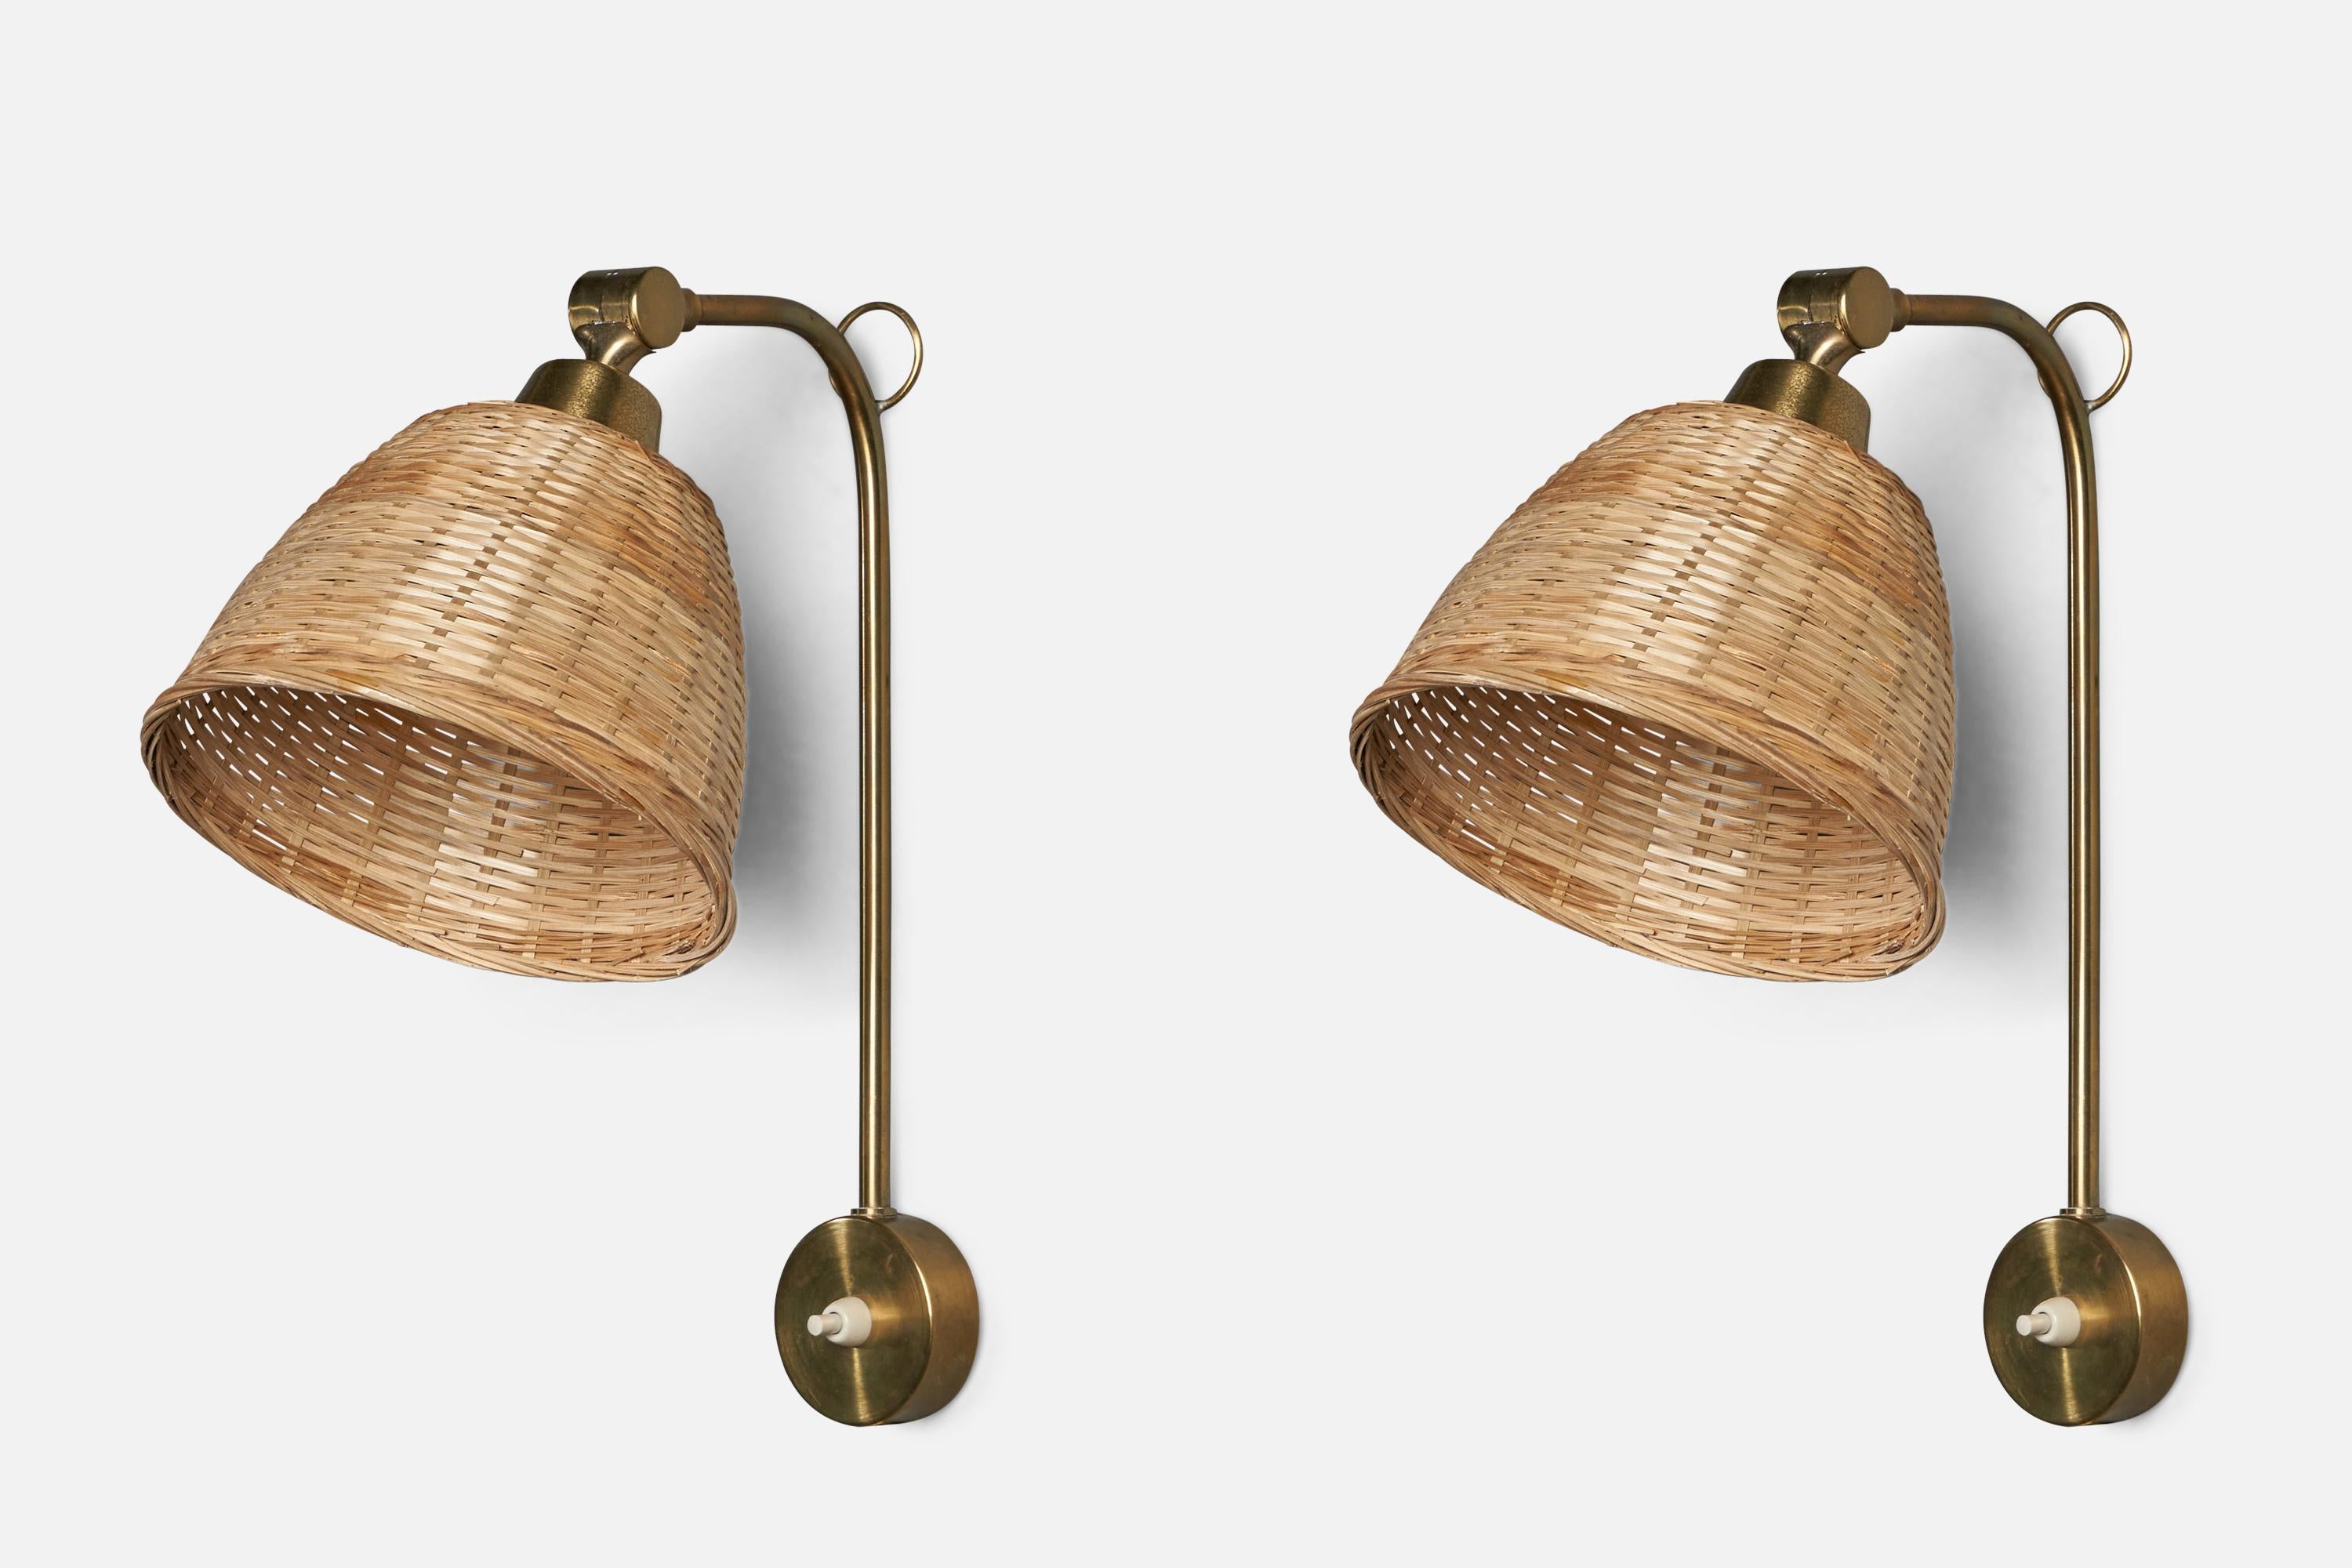 A pair of brass and rattan wall lights designed and produced in Sweden, 1960s.

Overall Dimensions (inches): 13.5” H x 6.75” W x 14” D
Back Plate Dimensions (inches): 2.5” Diameter x 0.8” D
Bulb Specifications: E-26 Bulb
Number of Sockets: 1
”AB öB”